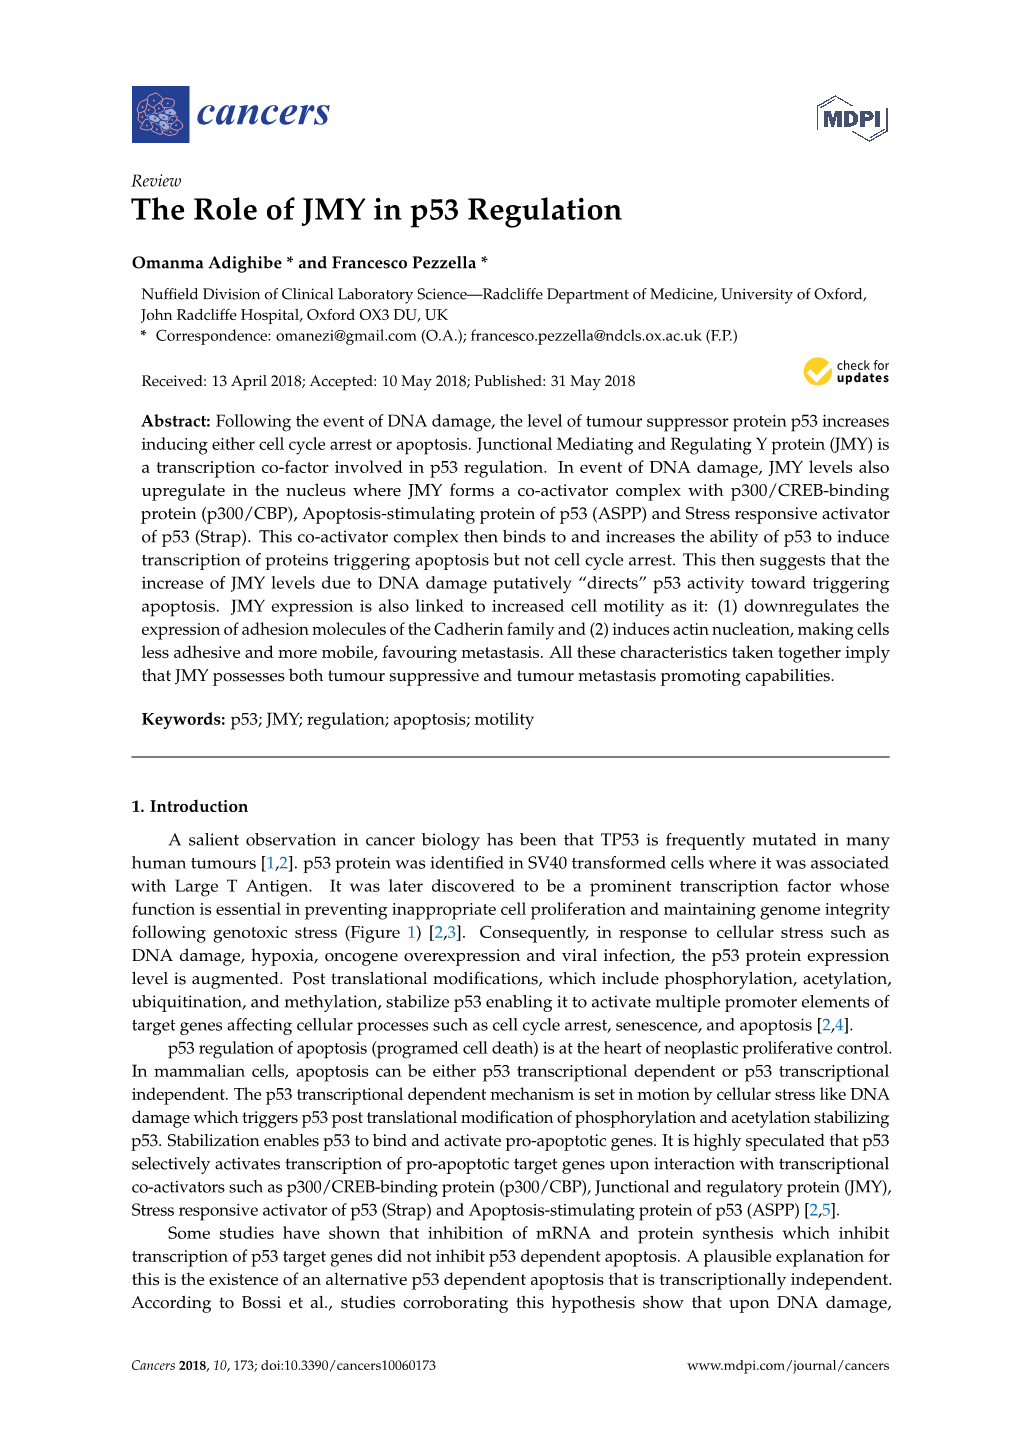 The Role of JMY in P53 Regulation